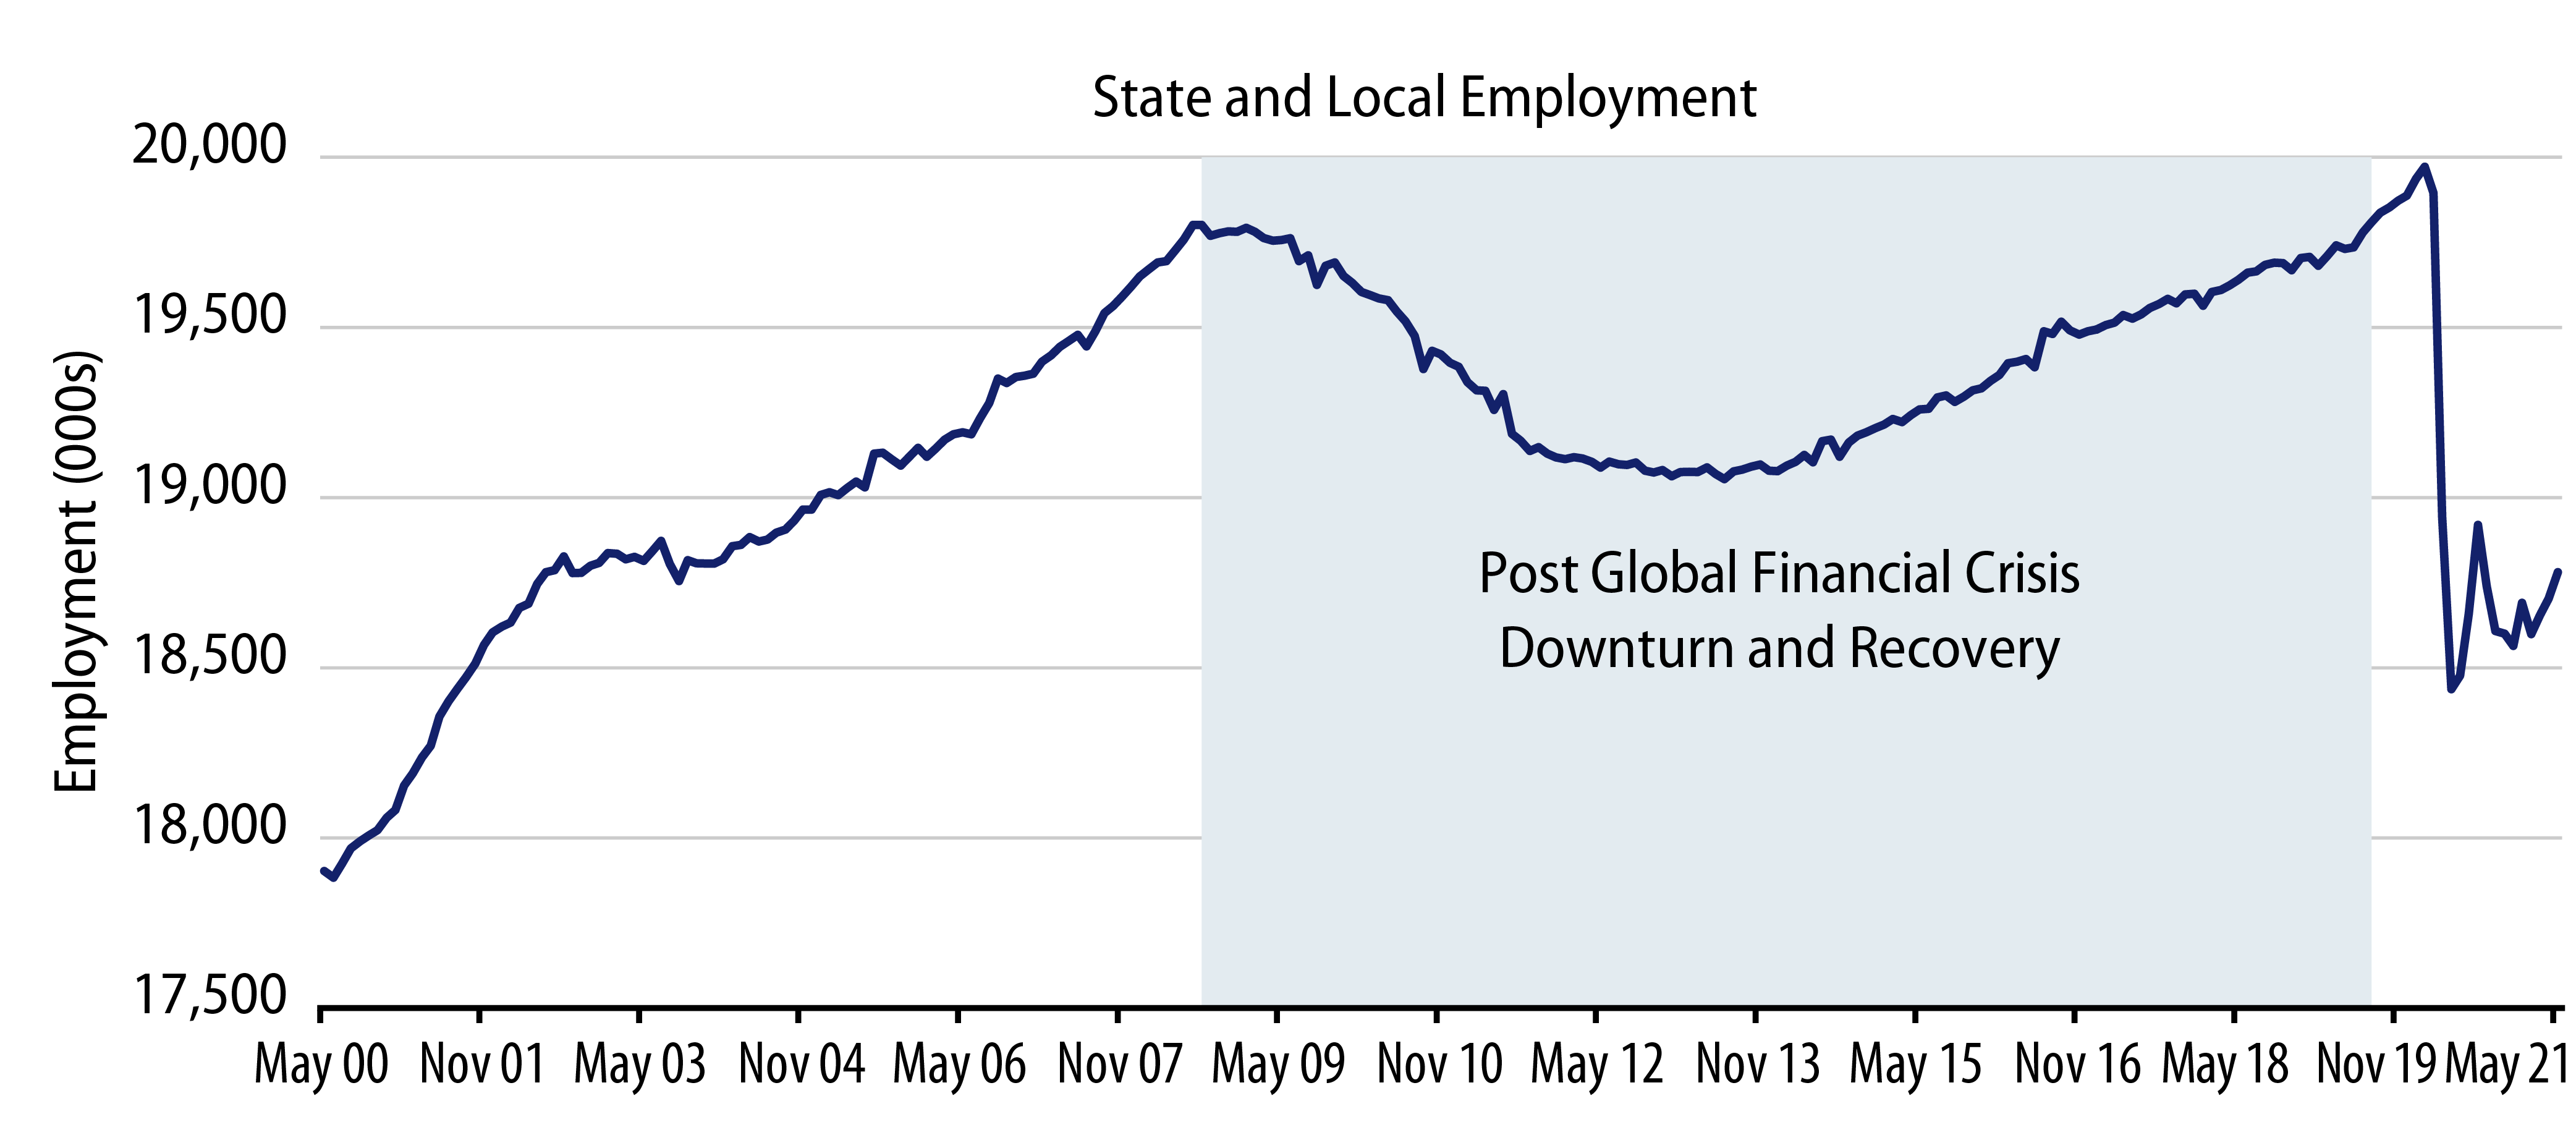 Explore Post Global Financial Crisis Downturn and Recovery 